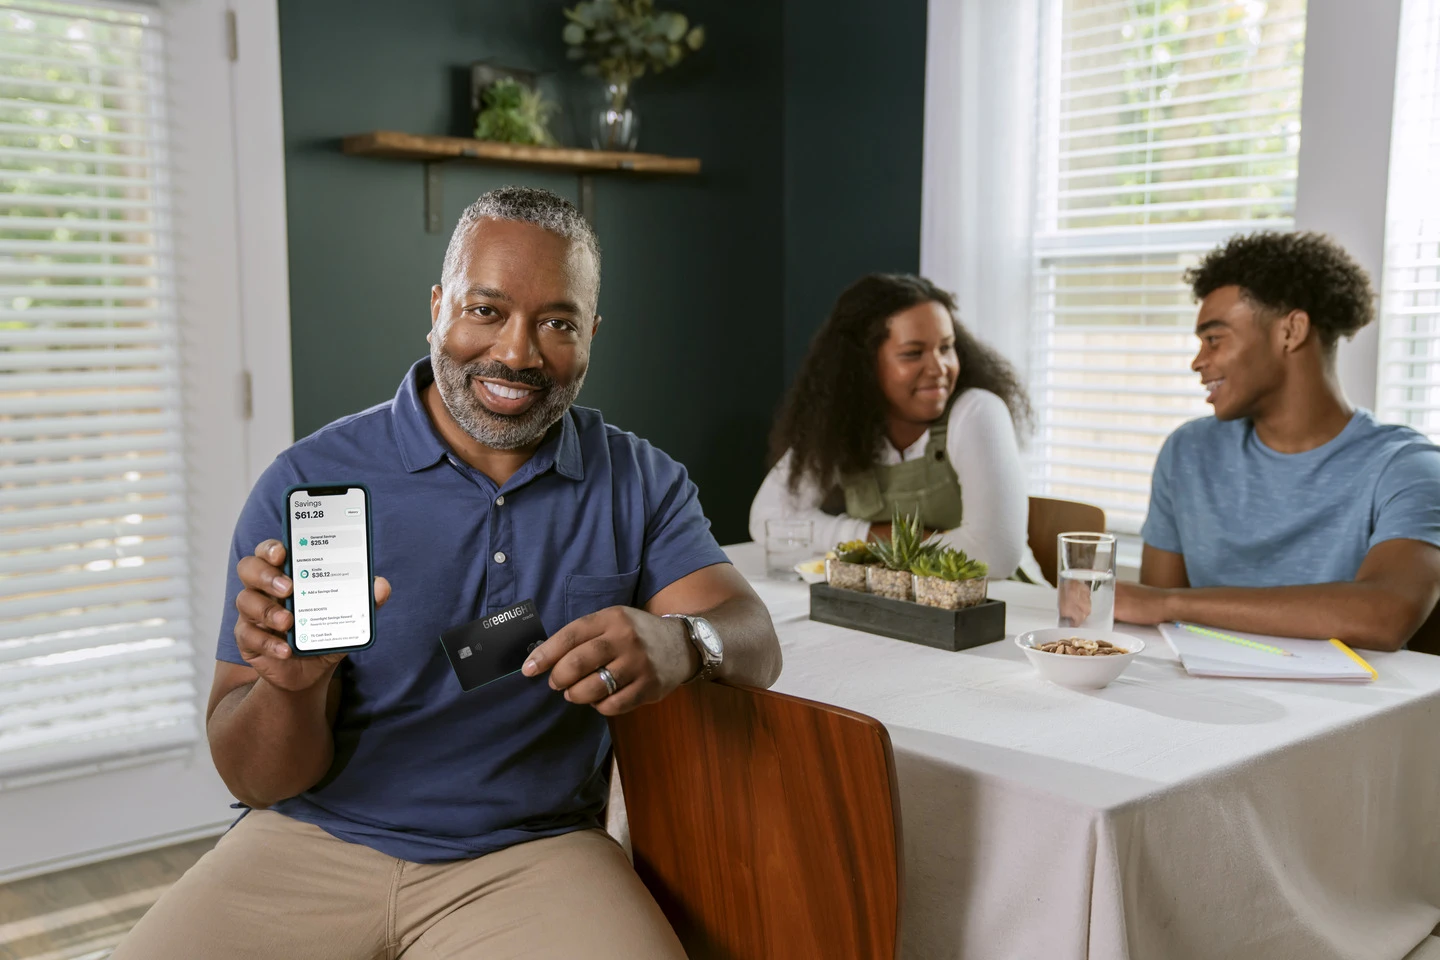 Father showing Greenlight mobile app and debit card with teens in the background